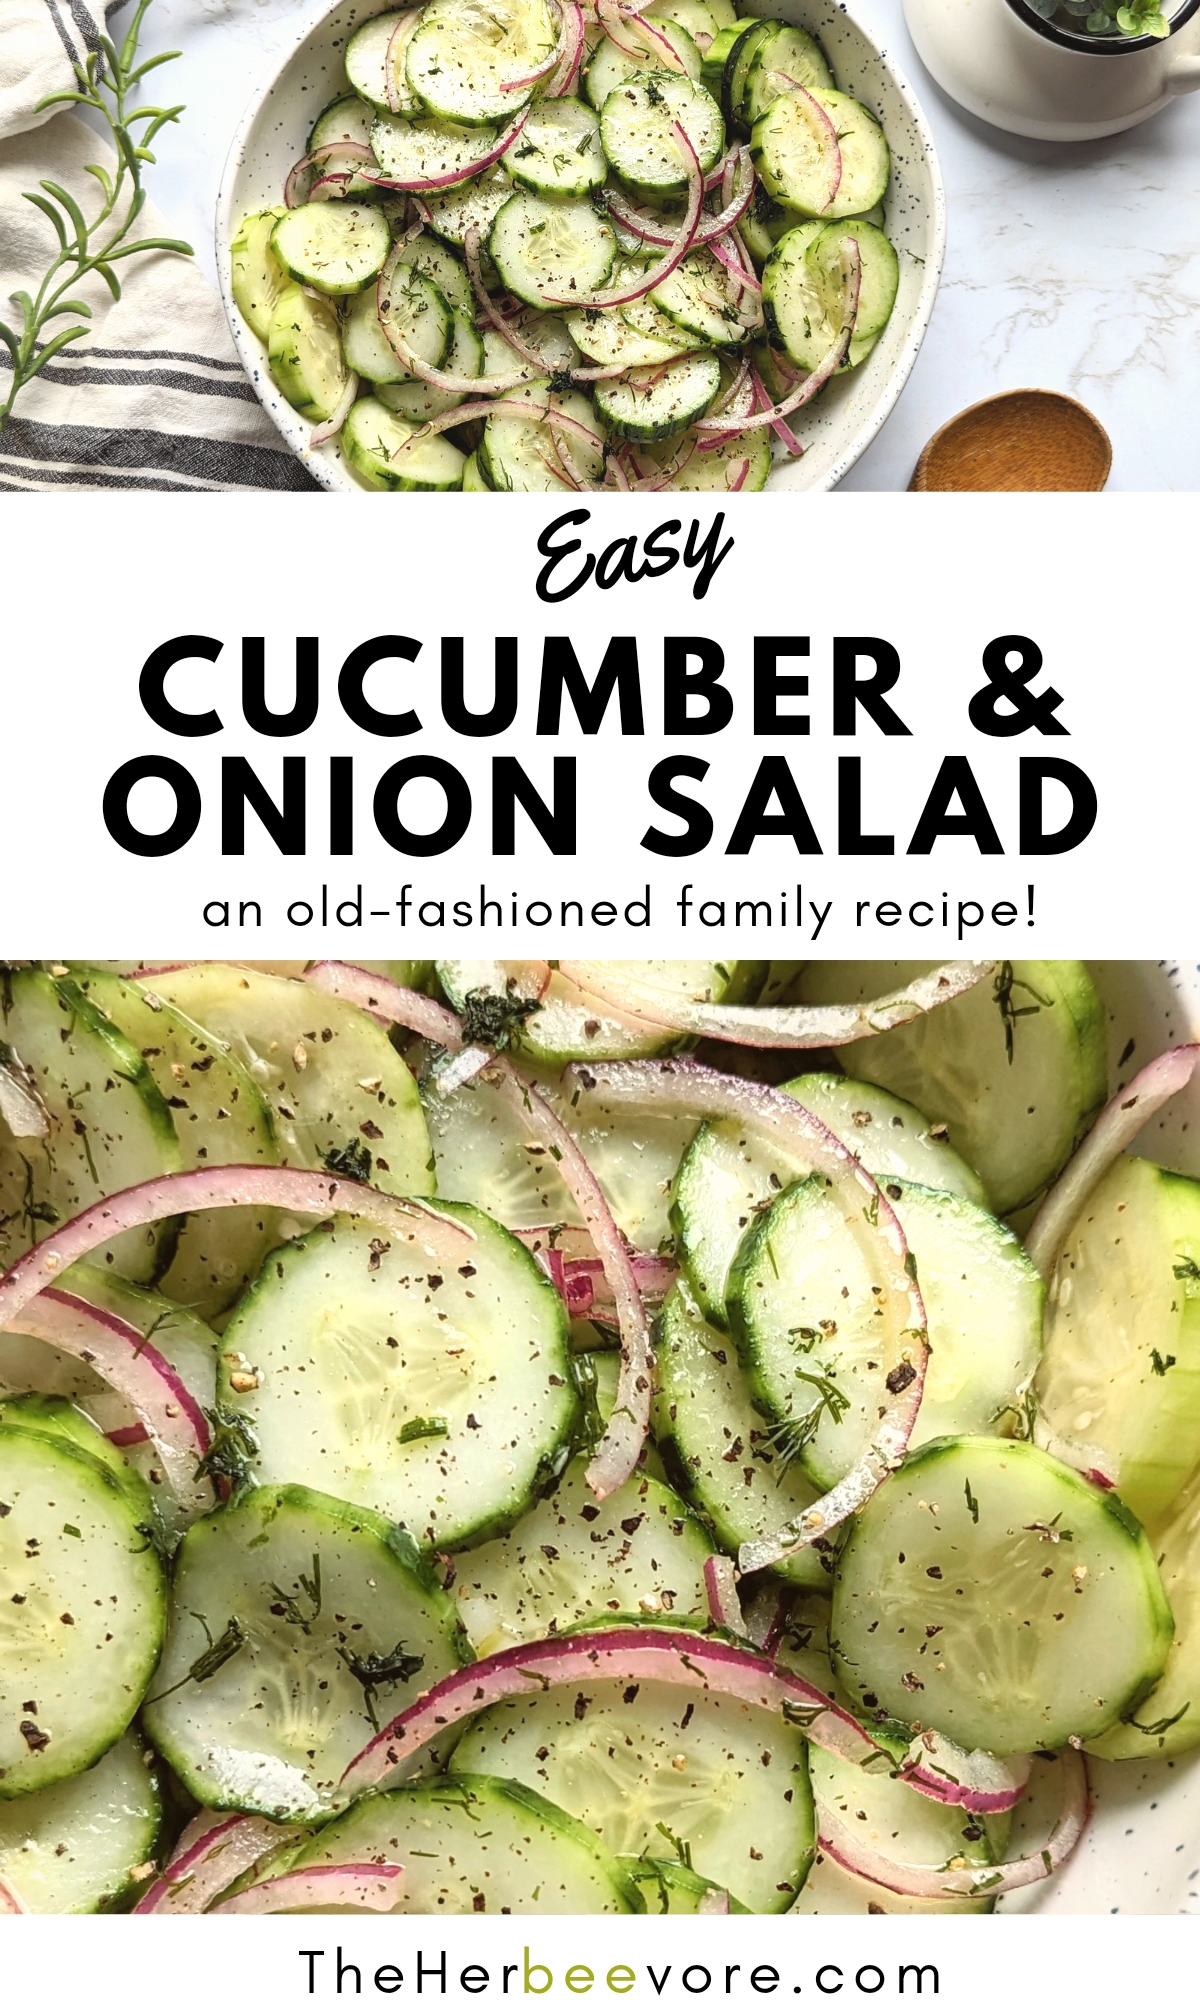 old fashioned cucumber salad recipe with onions and vinegar healthy summer cucumber recipes for side dishes parties or bbq sides with cucumbers.